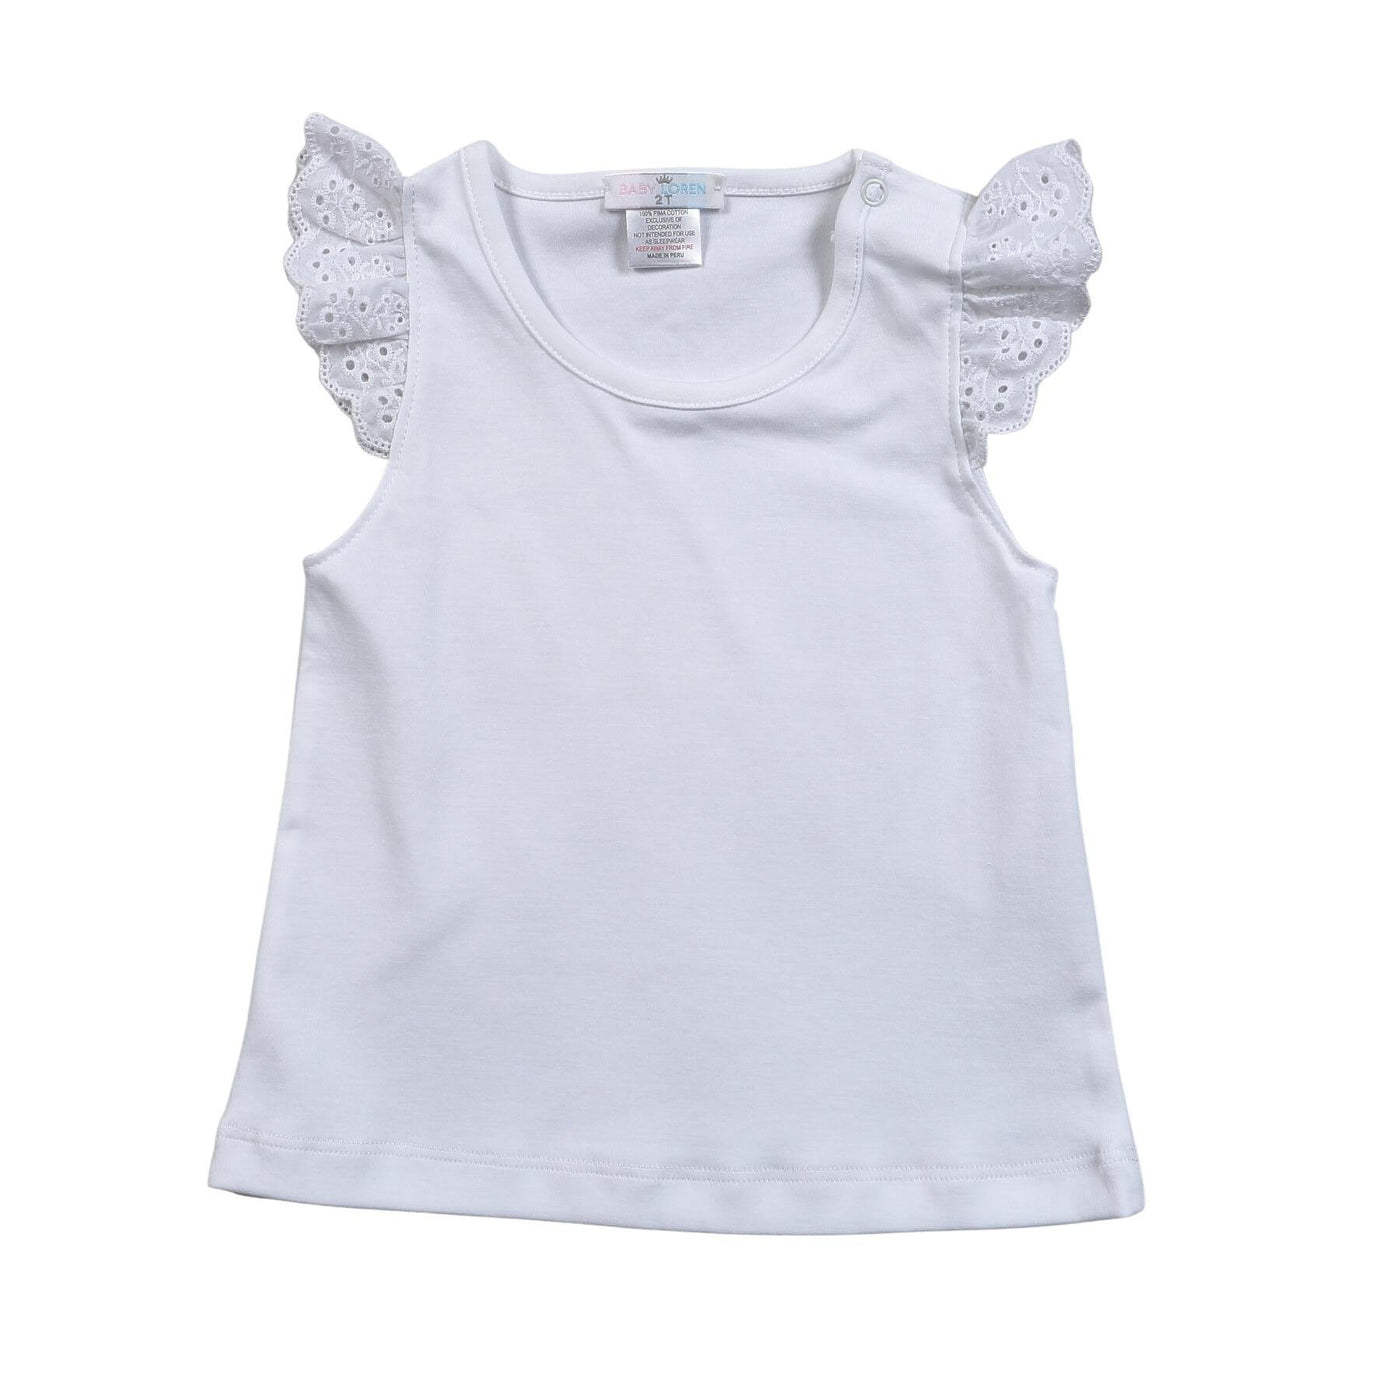 WHITE EYELET BUTTERFLY SLEEVES TOP - Breckenridge Baby